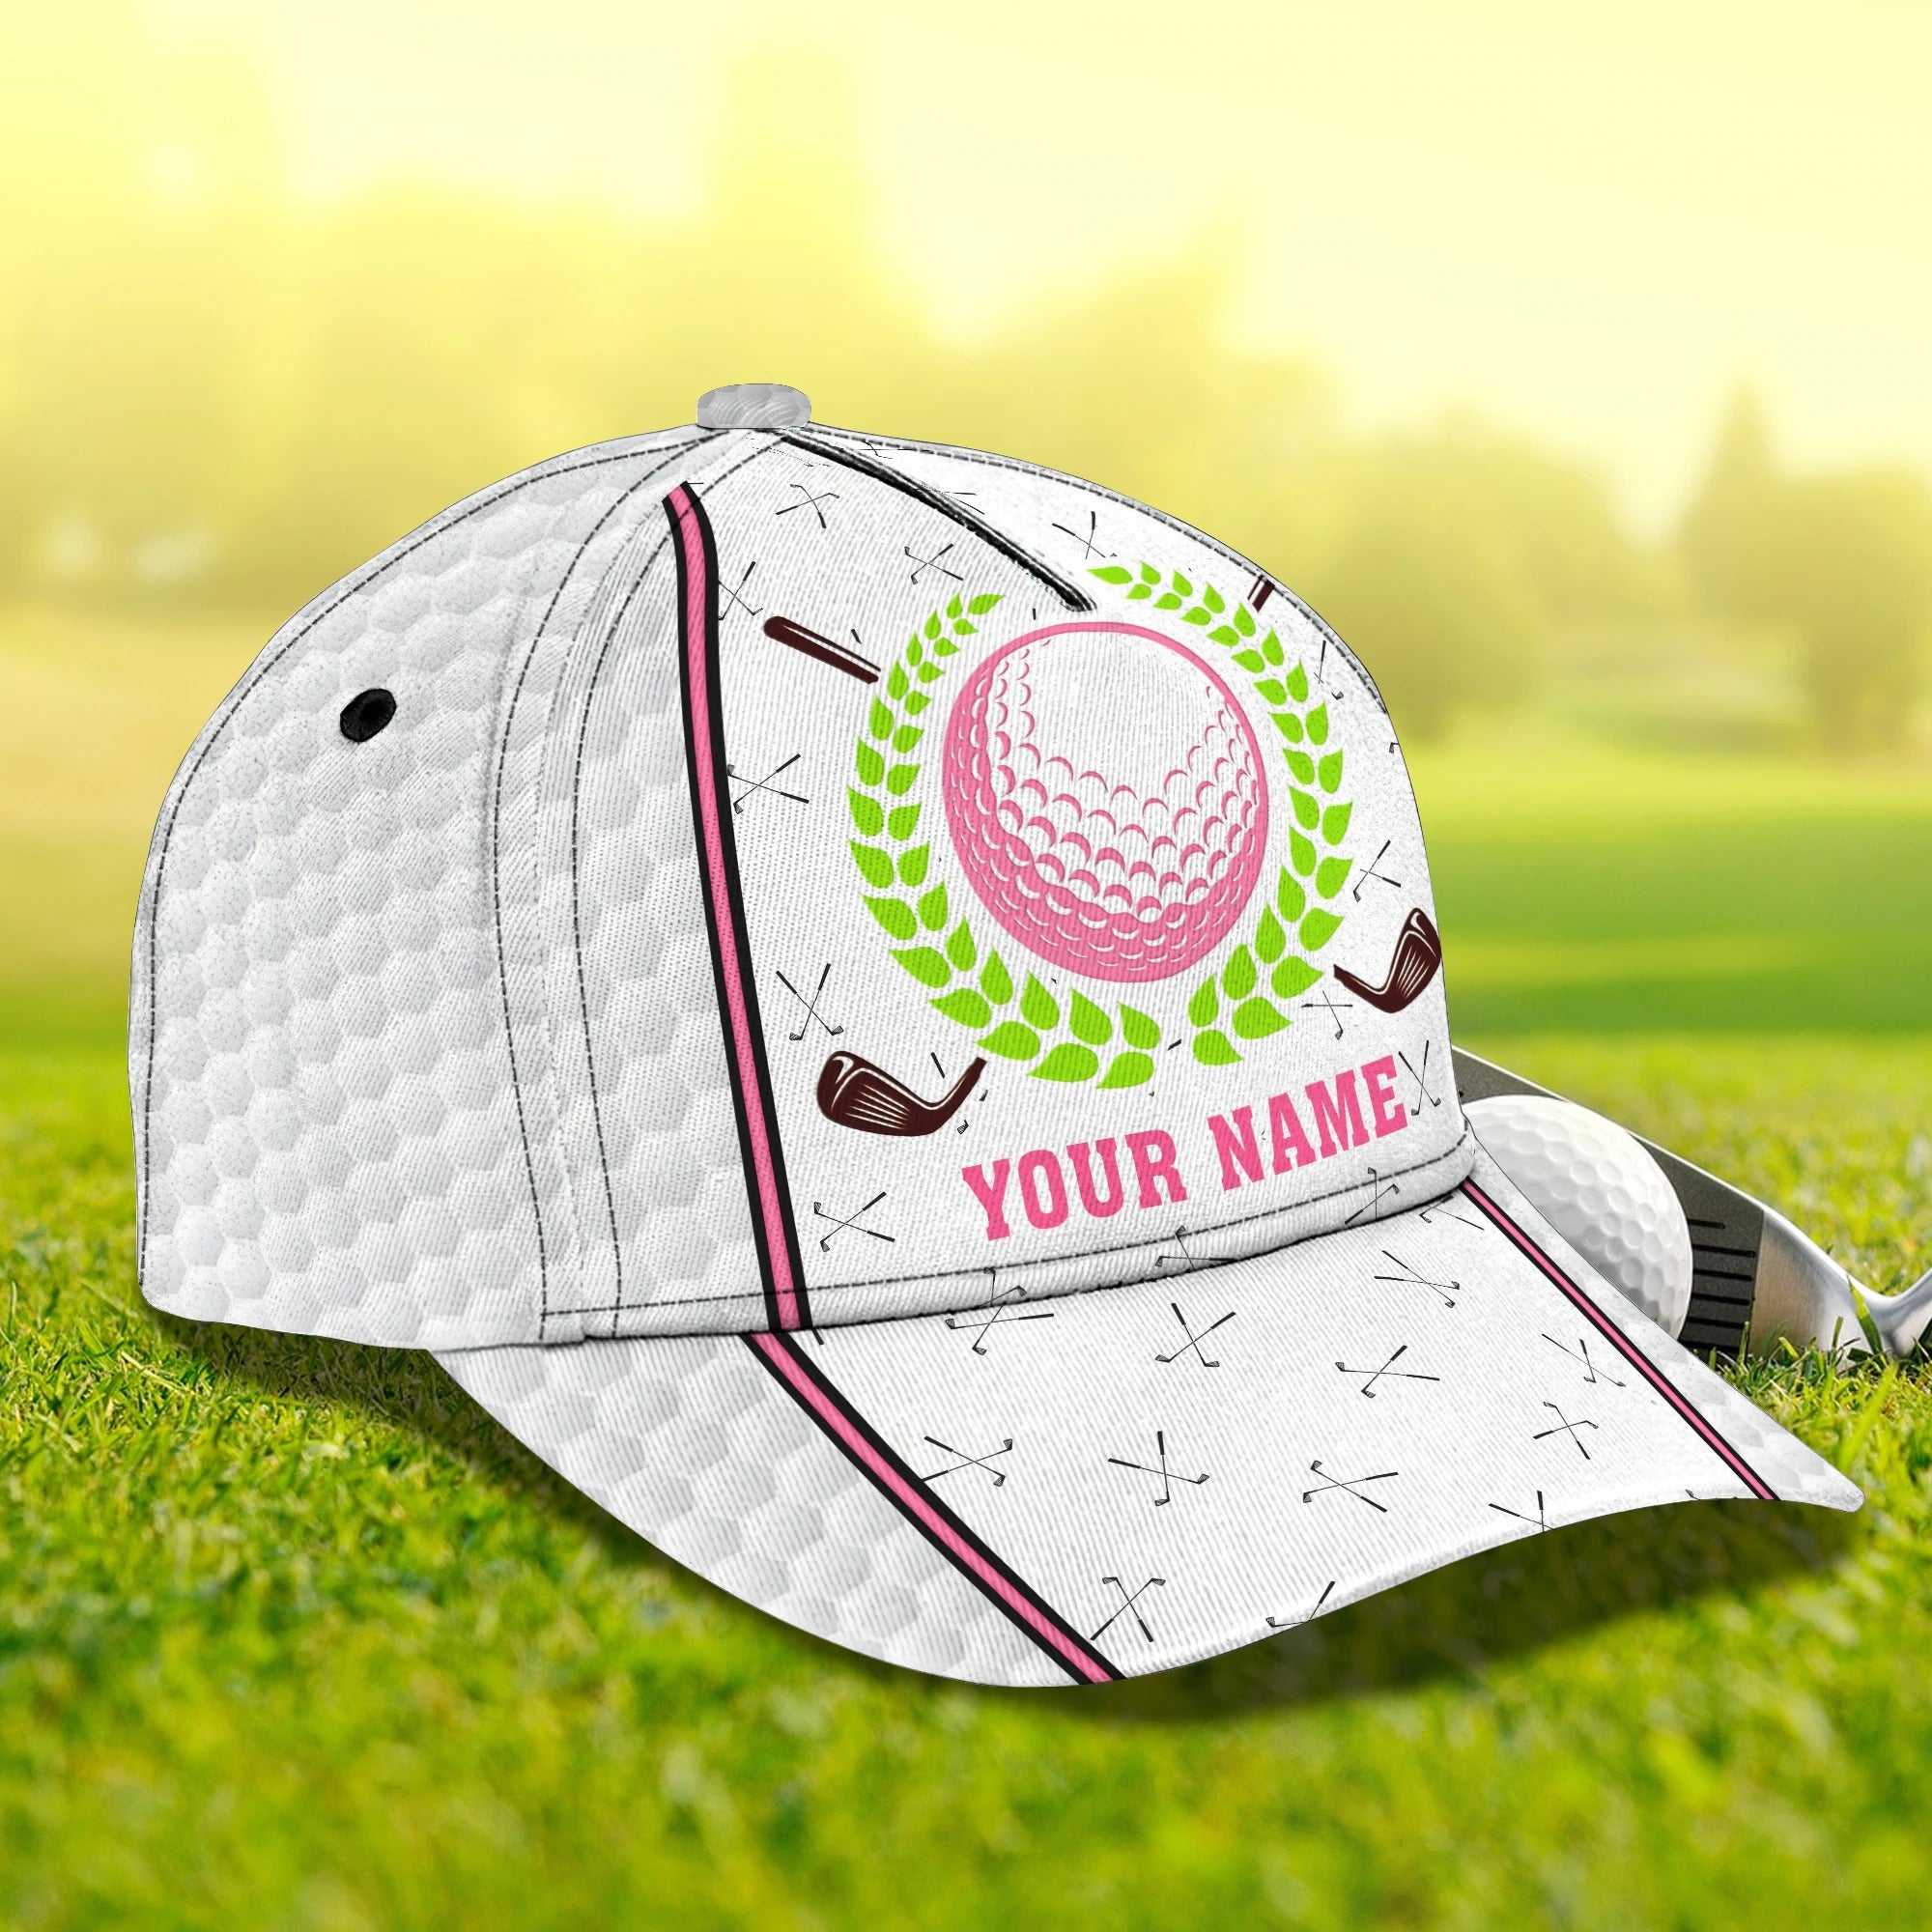 Personalized Womens Golf Cap/ Queen Of The Green Baseball 3D Full Print Cap Hat For Golf Lover